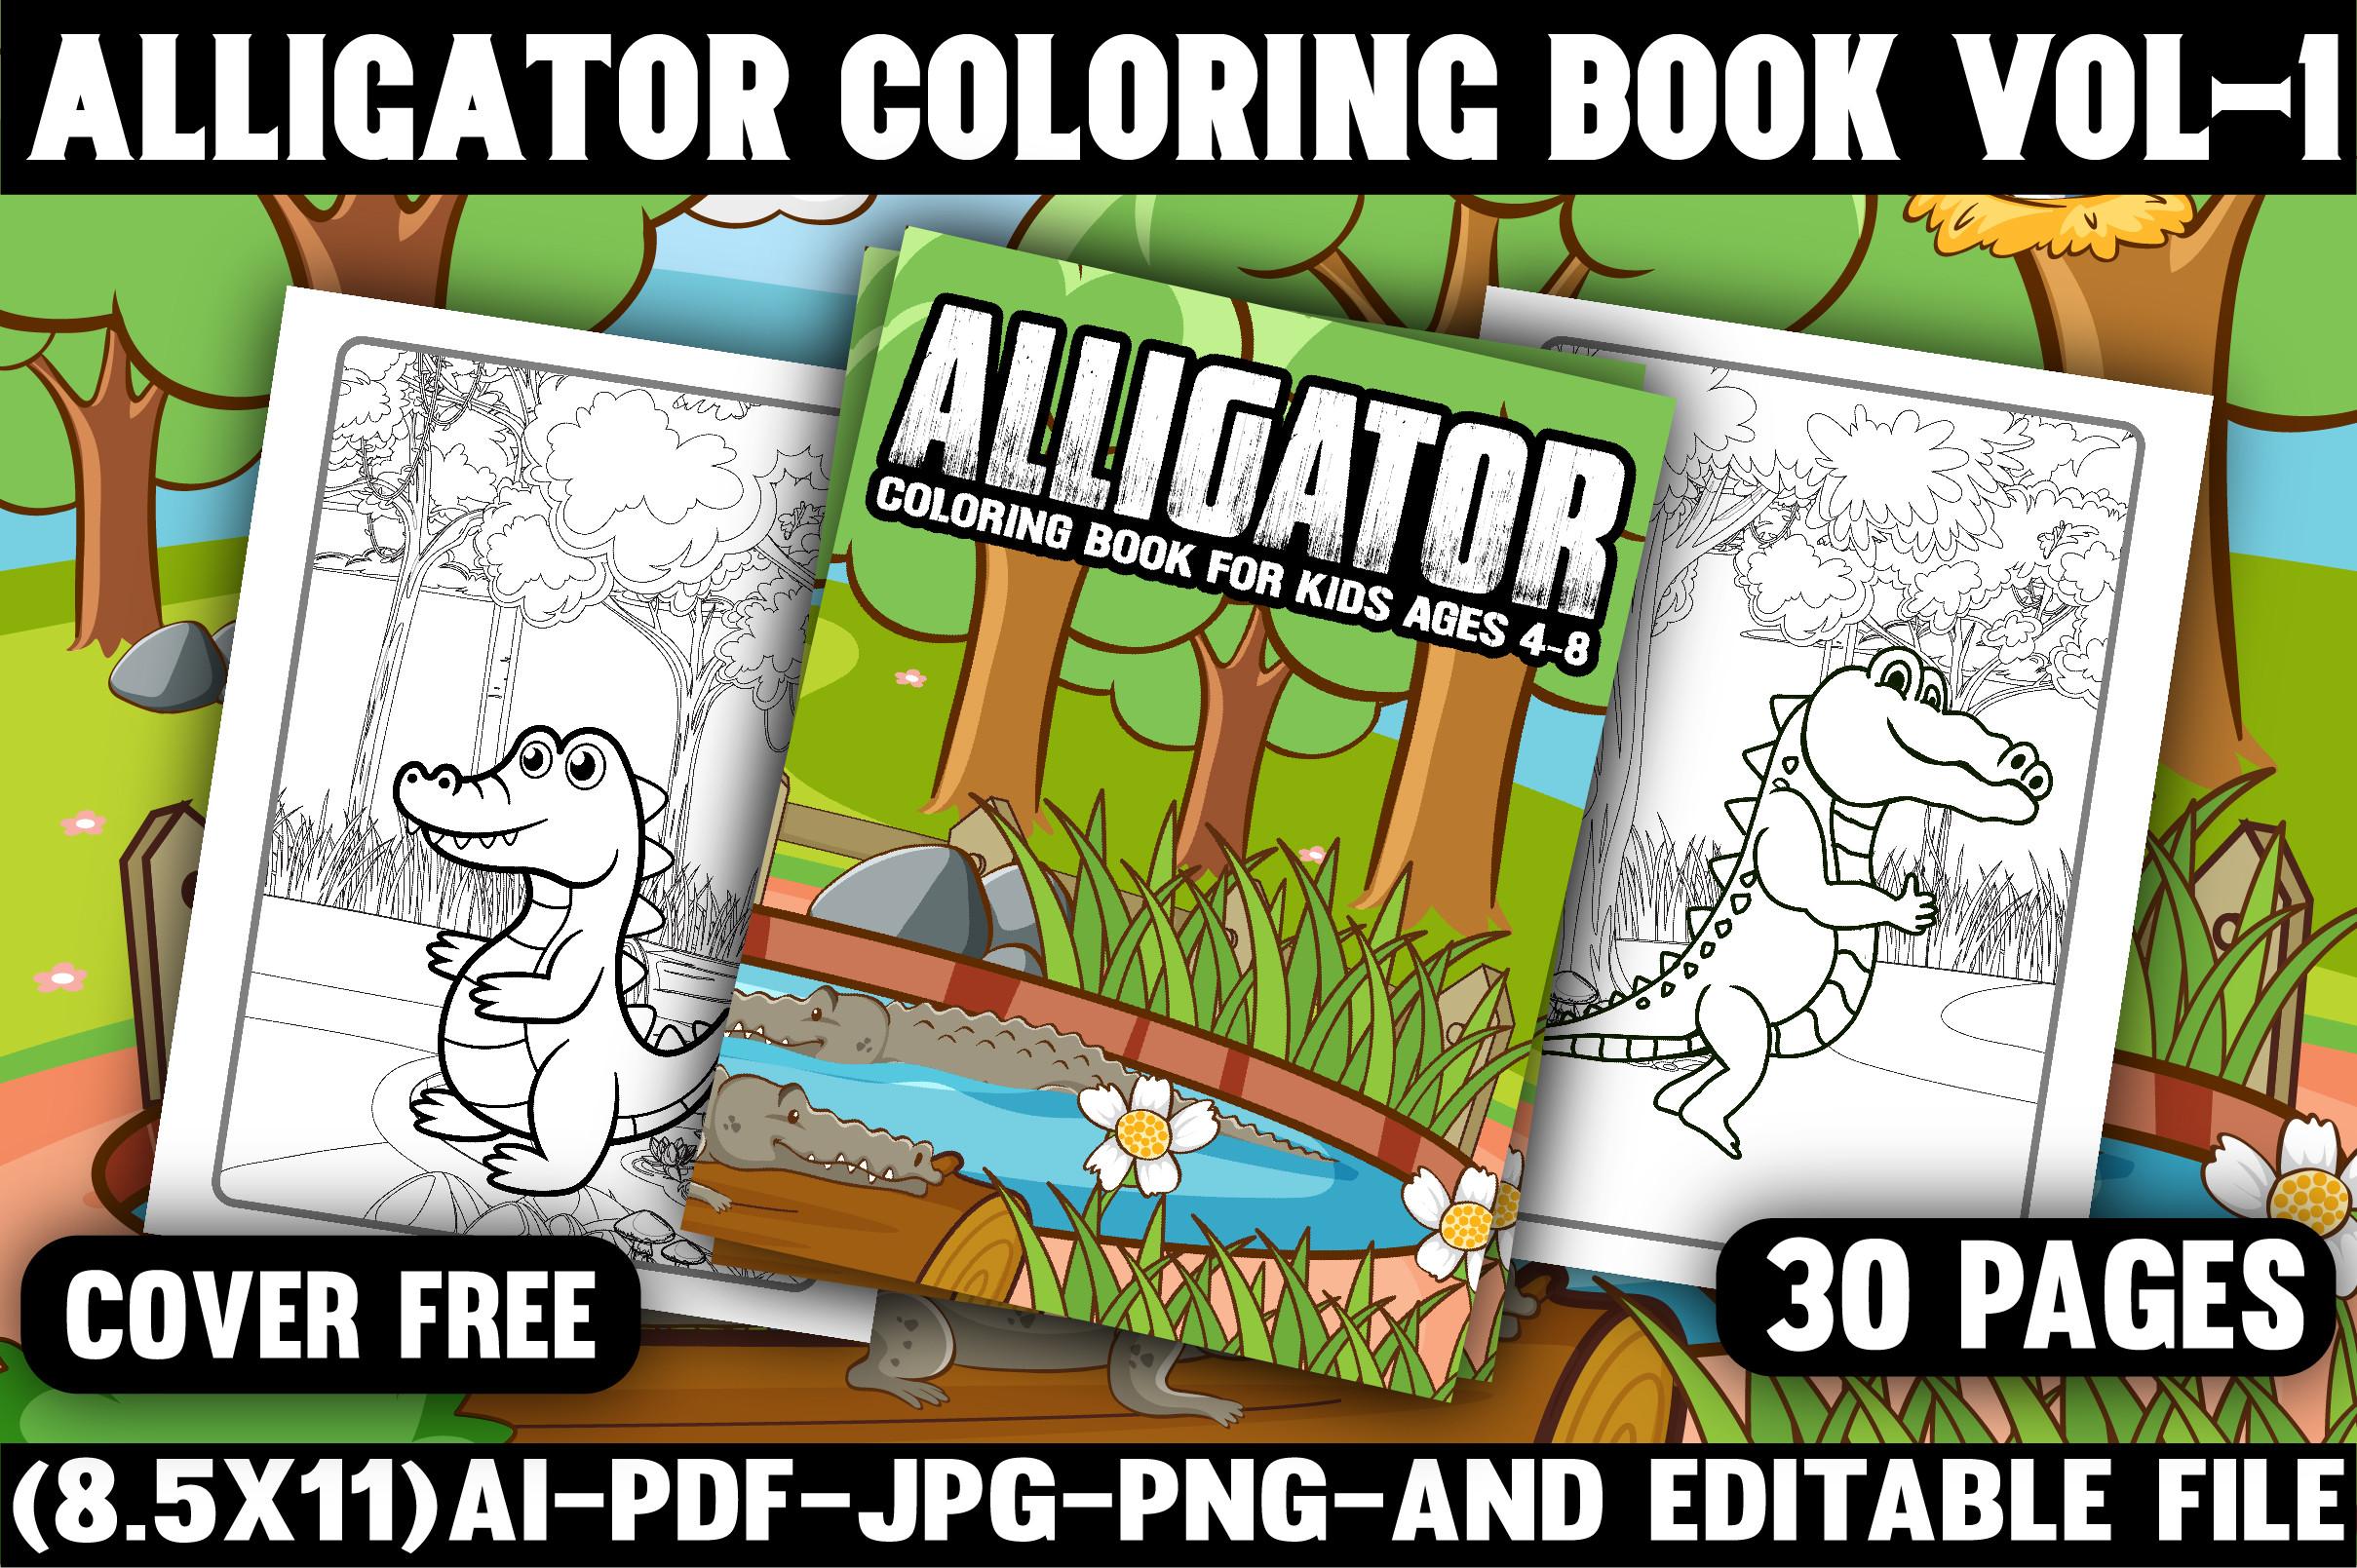 Alligator Coloring Pages for Kids VoL-1